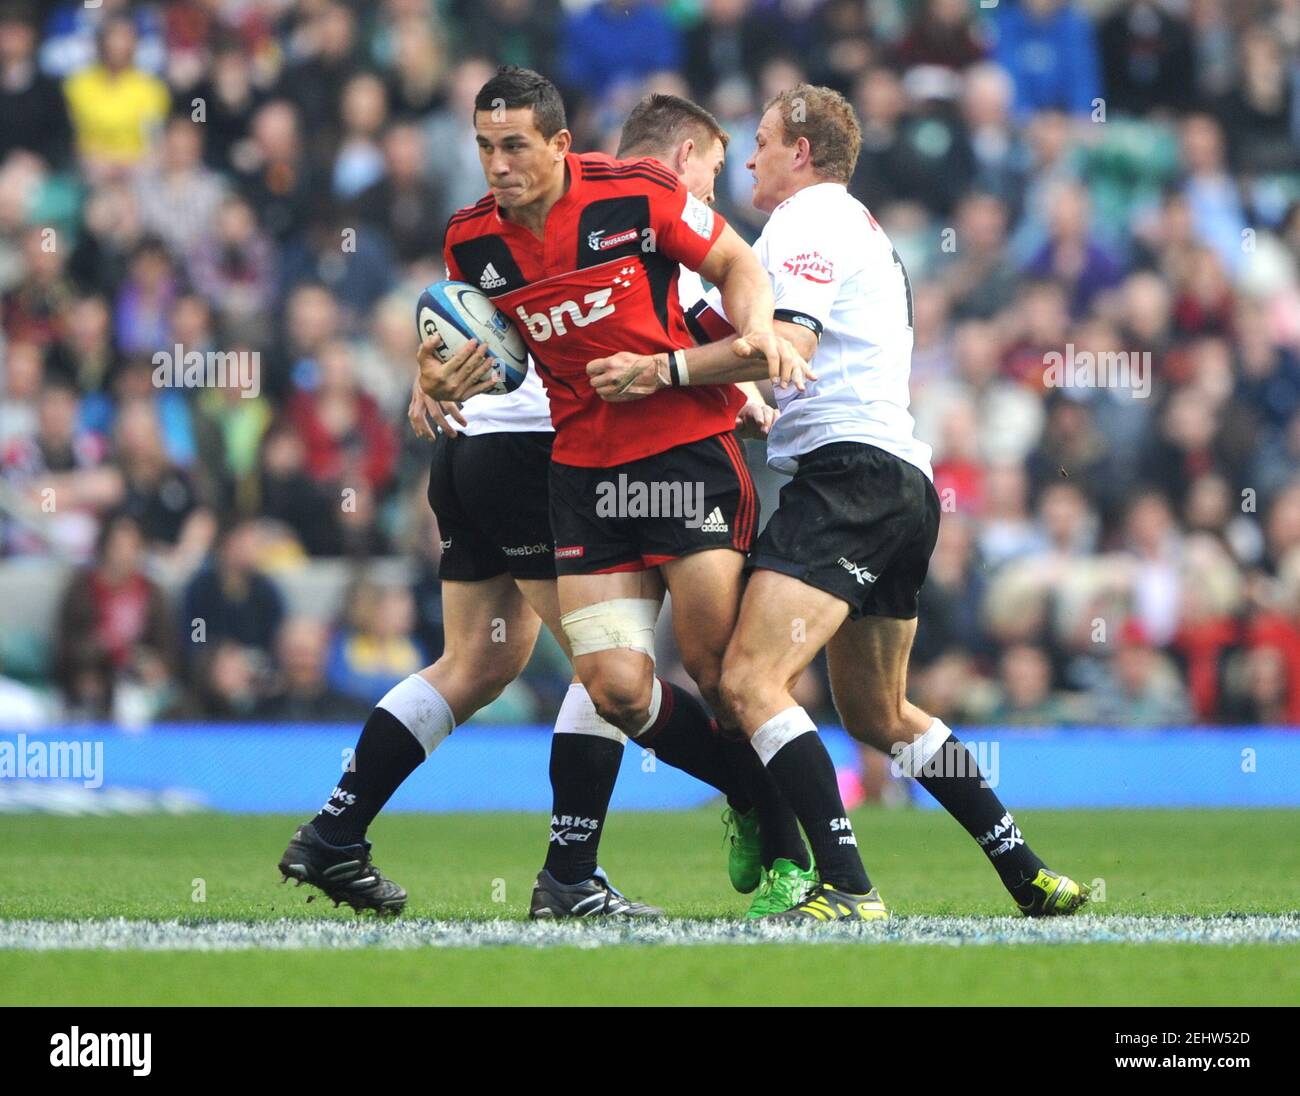 Rugby Union - Crusaders v Sharks Investec Super Rugby - Twickenham Stadium  - 10/11 - 27/3/11 Sonny Bill Williams - Crusaders (C) in action against  Sharks Mandatory Credit: Action Images / Henry Browne Stock Photo - Alamy